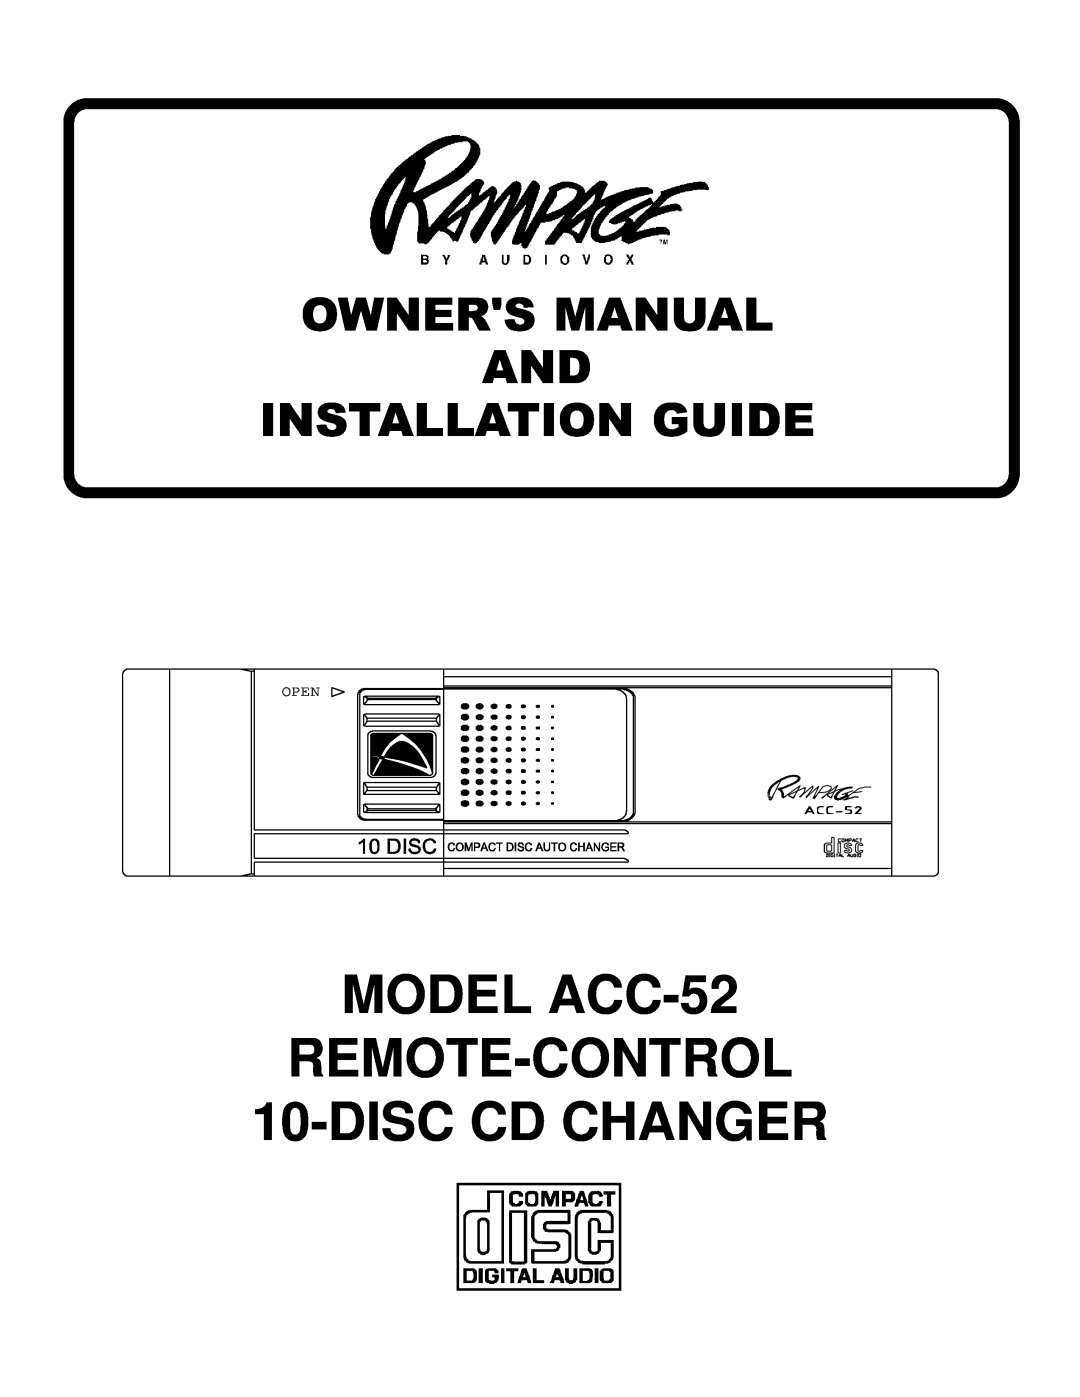 Audiovox owner manual MODEL ACC-52 REMOTE-CONTROL 10-DISCCD CHANGER, Open 